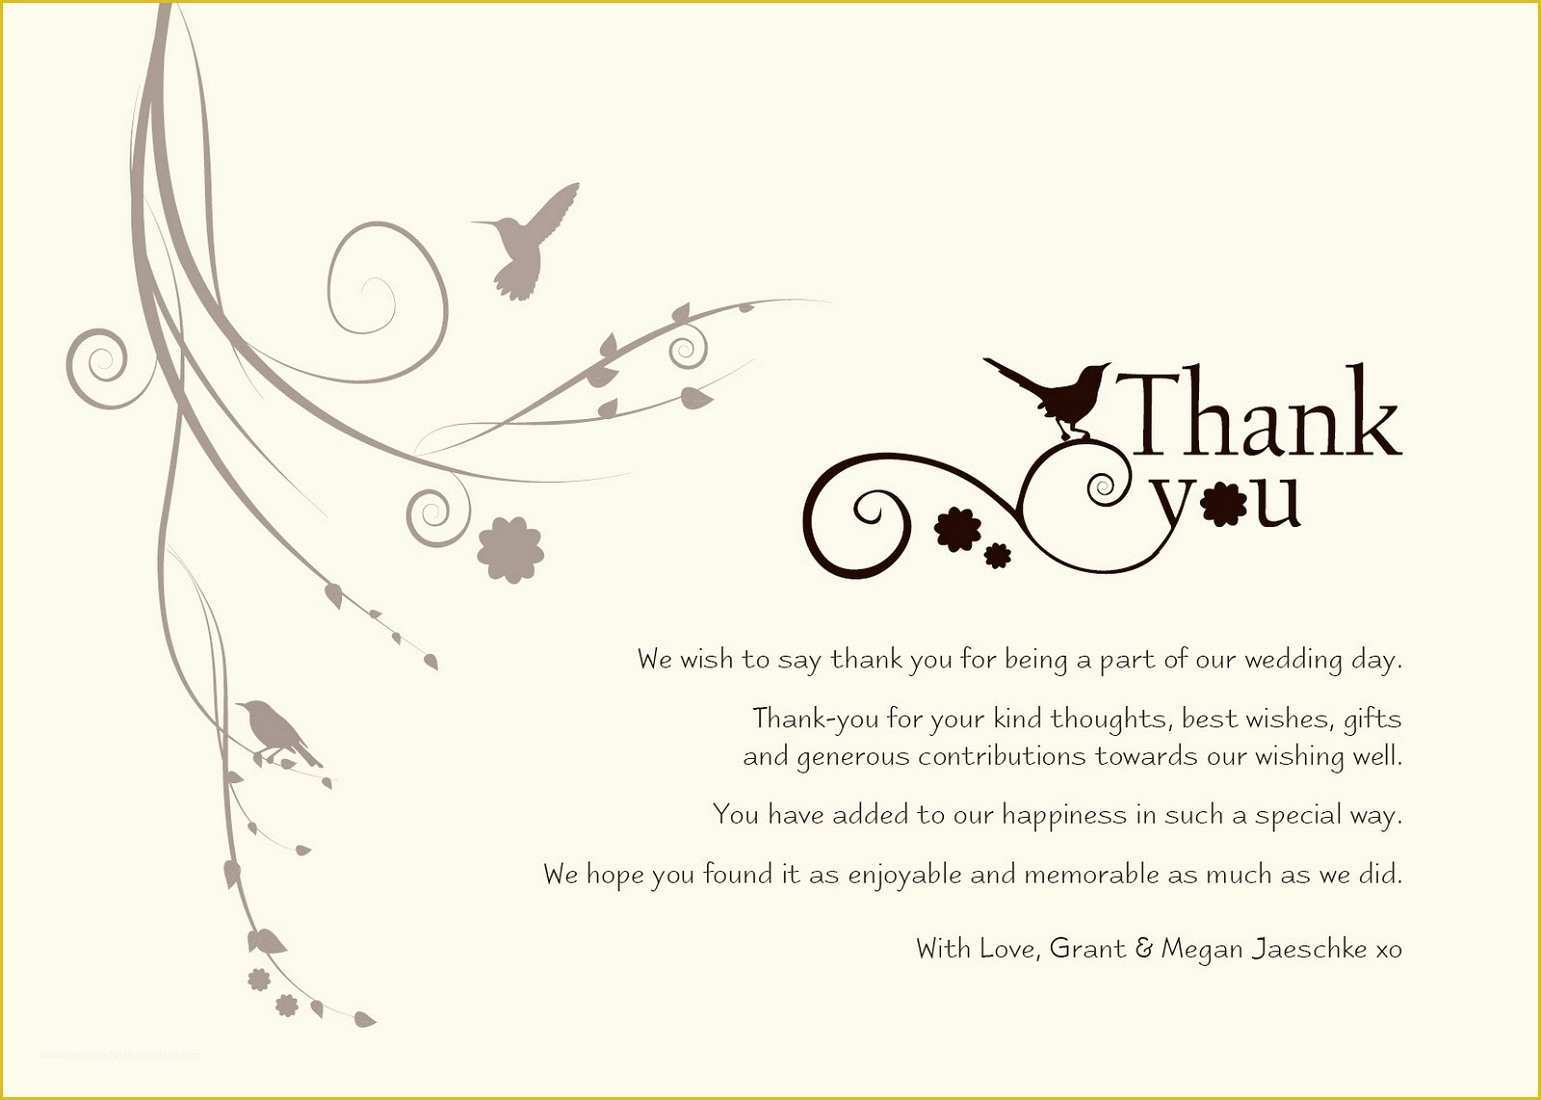 Thank You Note Template Free Of Thank You Notes Samples for Gift In Cute Shapes